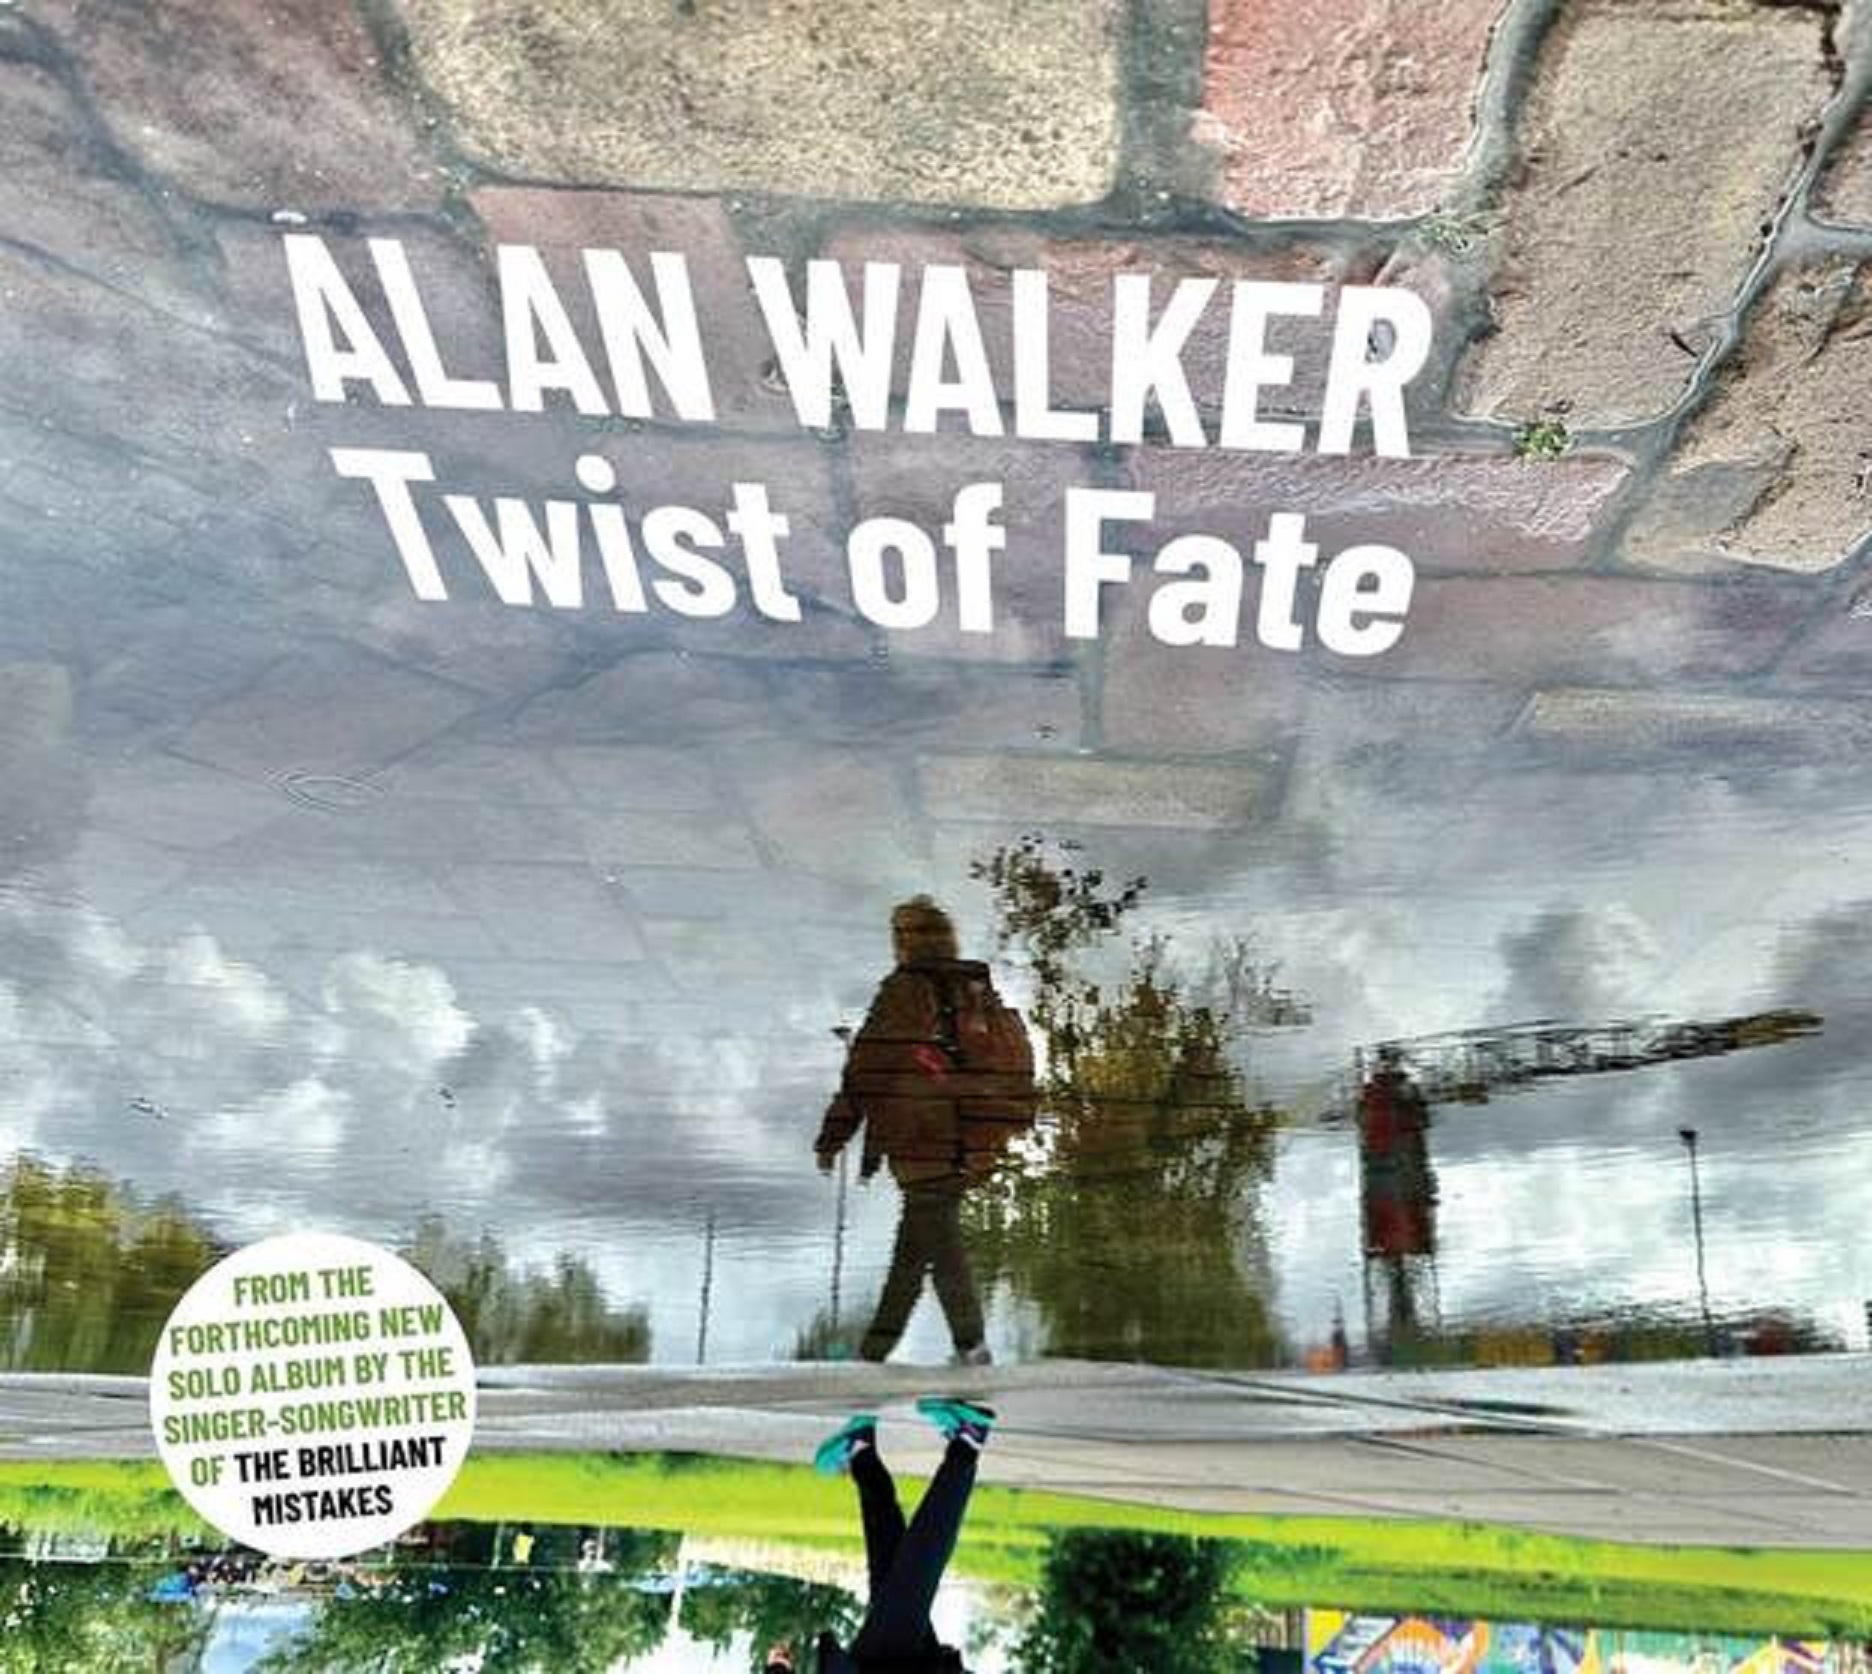 Alan Walker (of The Brilliant Mistakes) Releases “Twist of Fate” - New Single